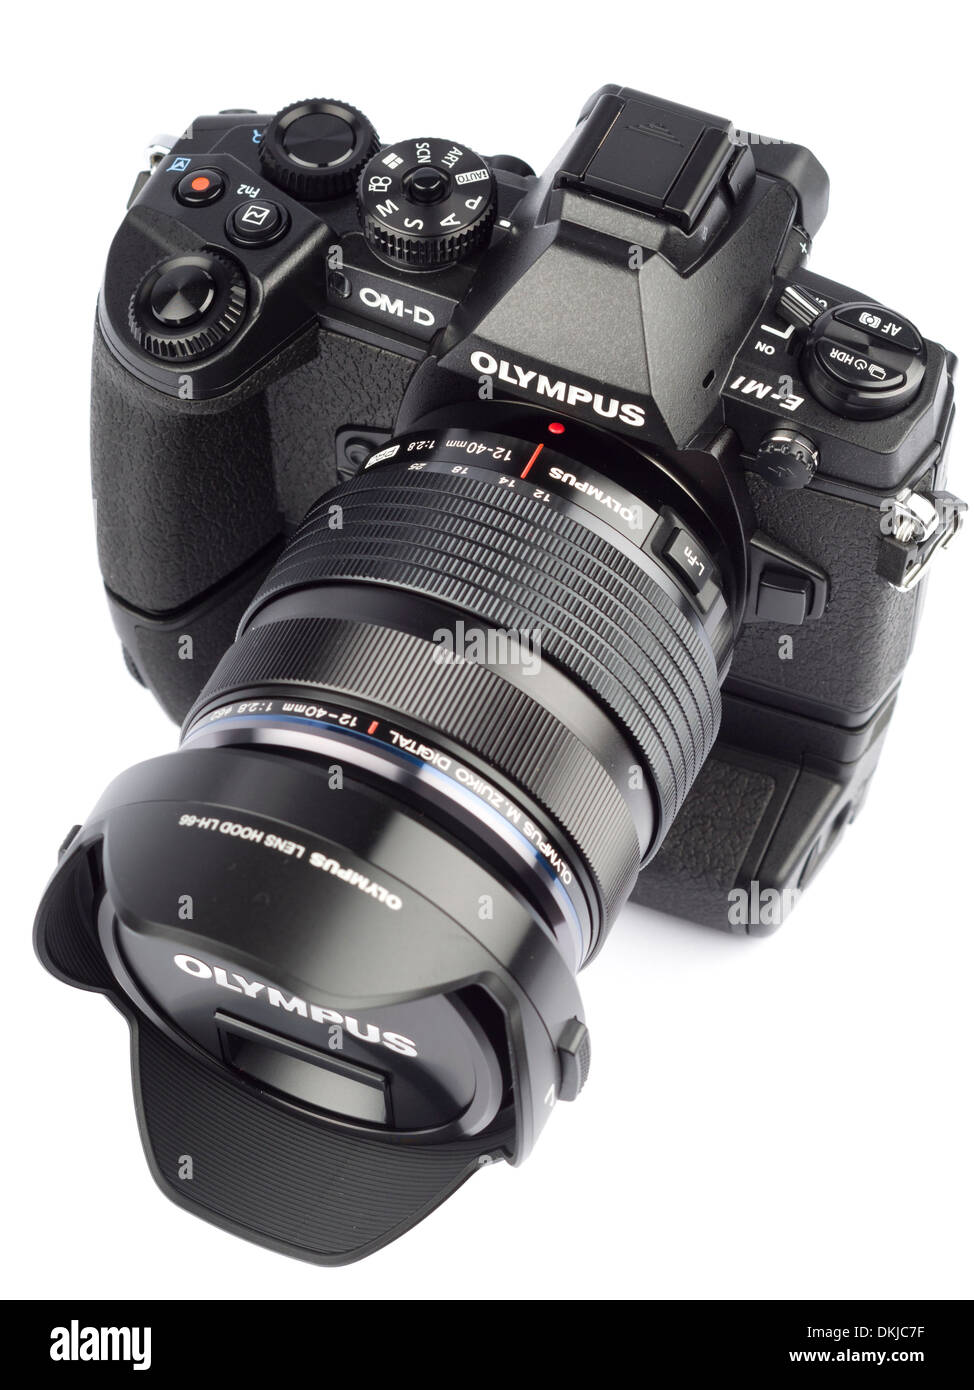 Olympus OM-D E-M1 digital mirrorless camera with HLD-7 vertical grip and 12-40mm f/2.8 pro zoom lens Stock Photo